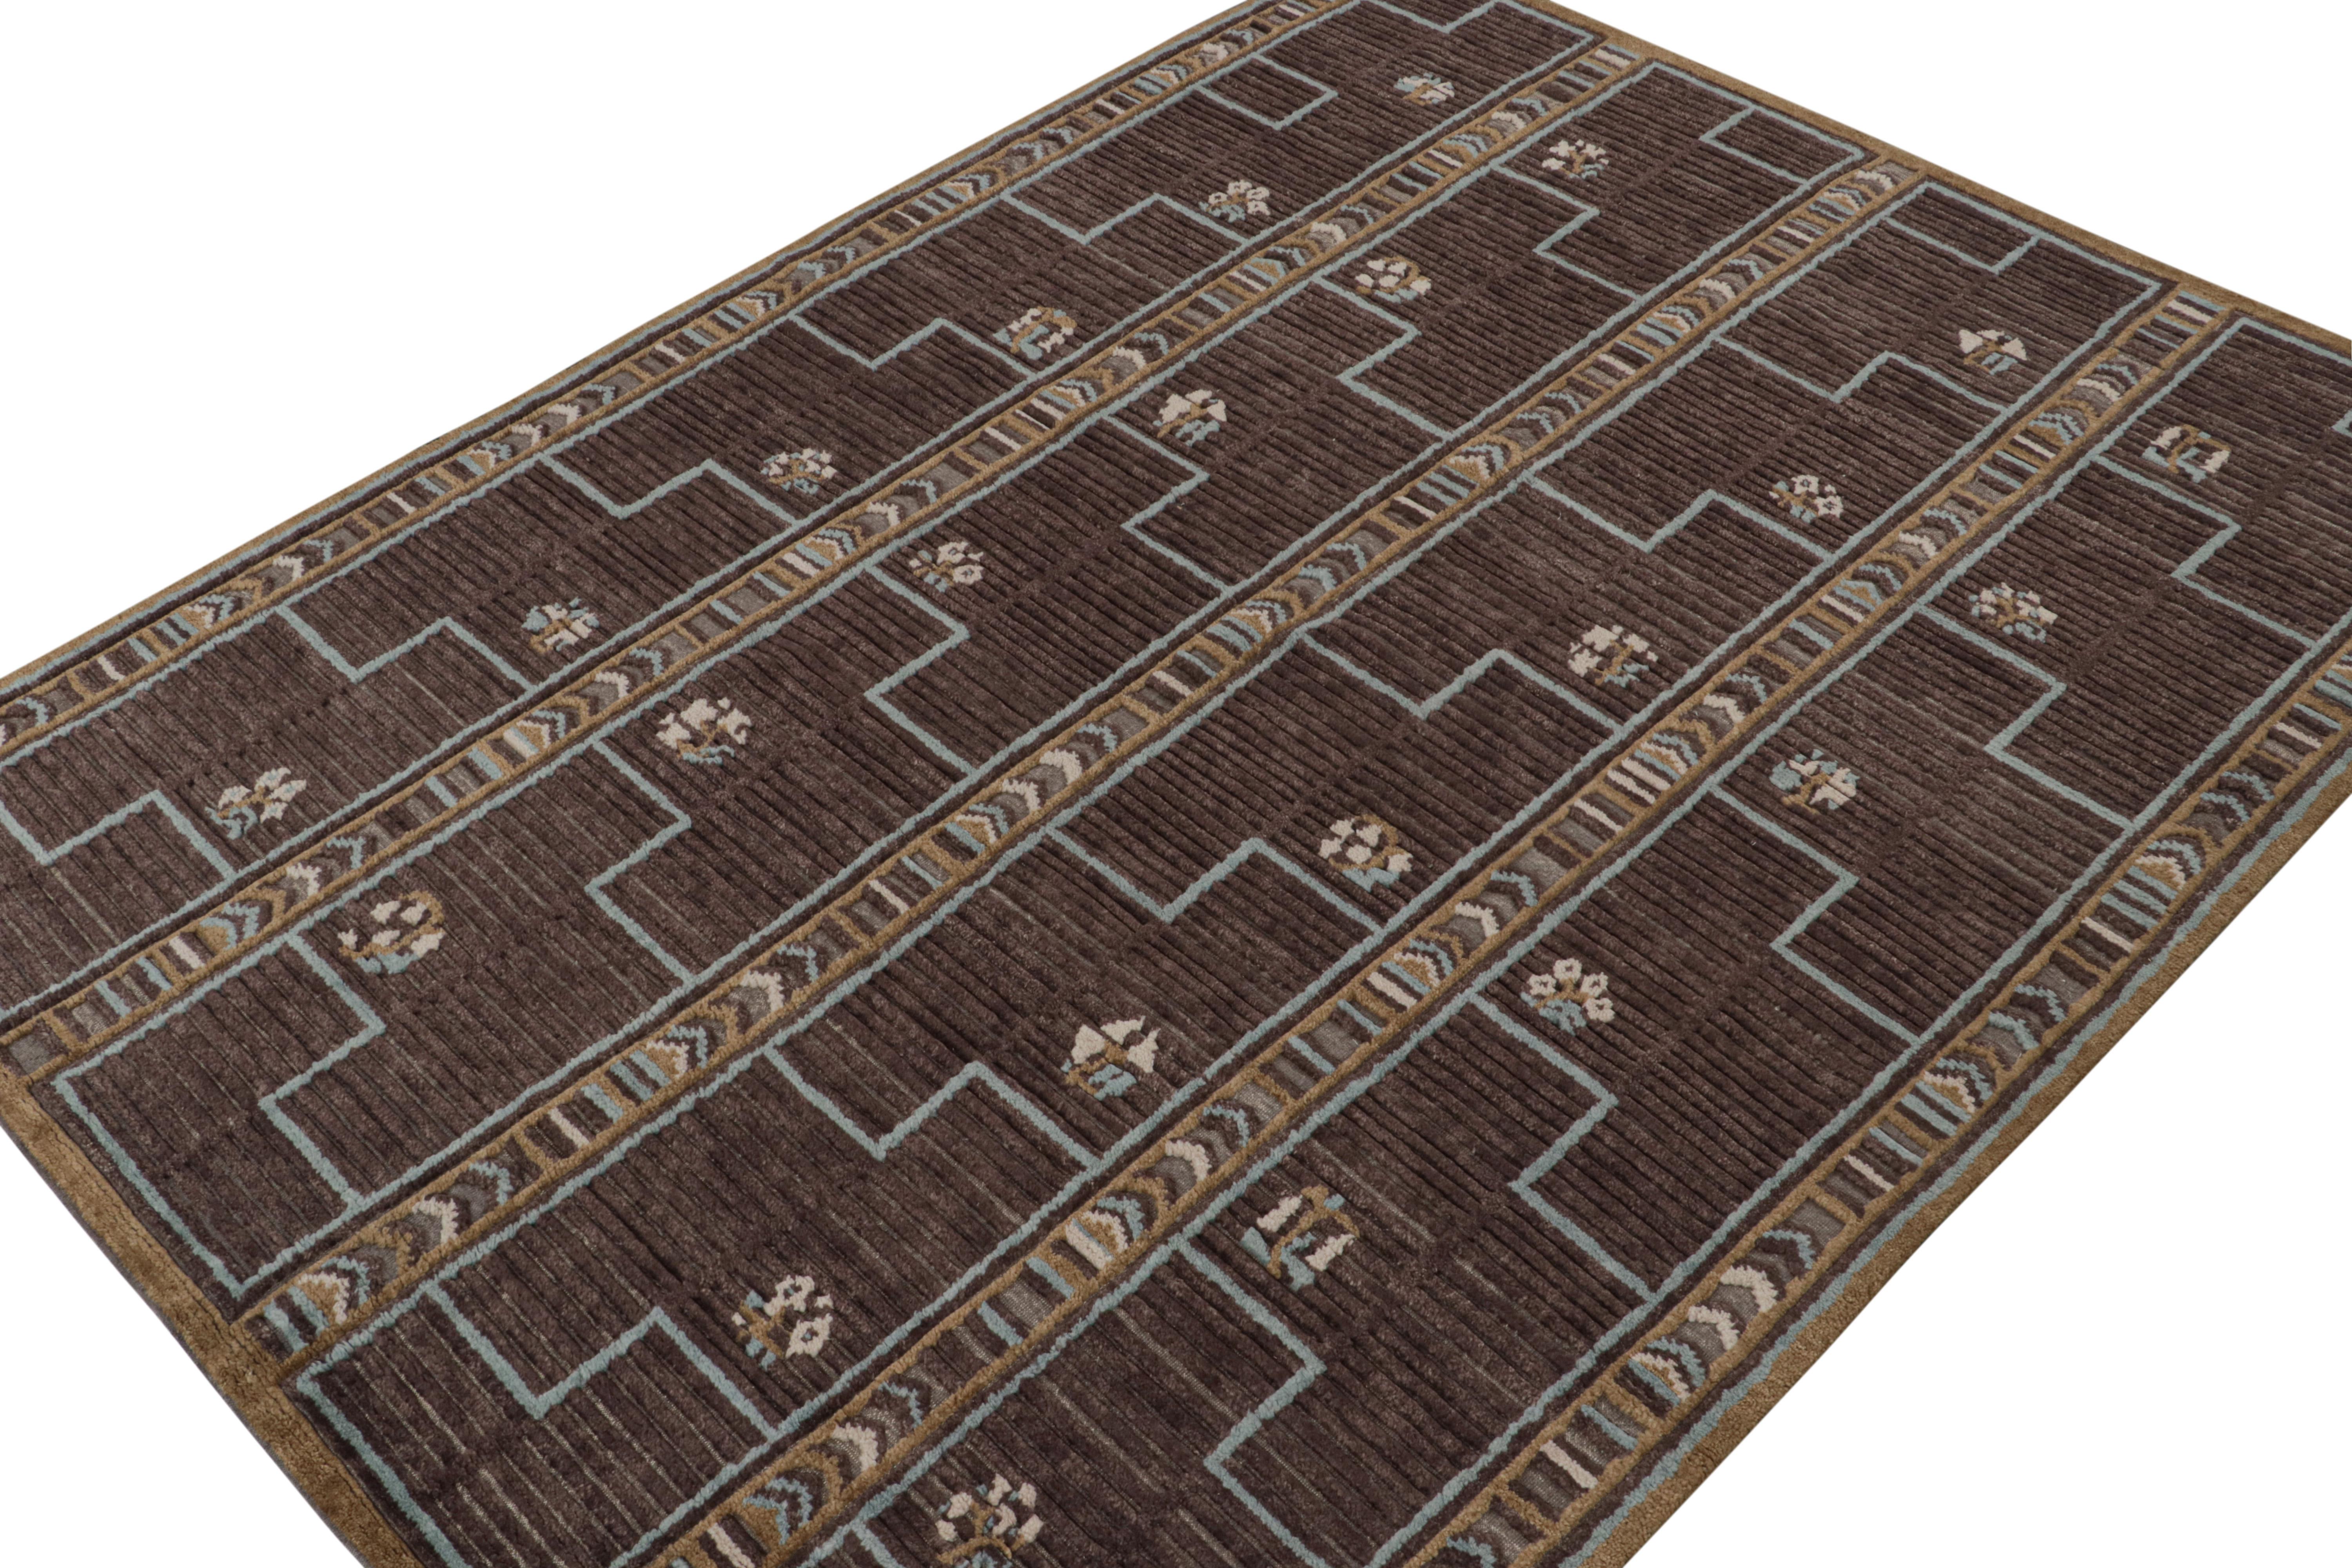 A smart 9x12 Swedish style rug from our award-winning Scandinavian collection. Hand-knotted in wool.

On the Design: 

This rug enjoys geometric patterns in comfortable brown, blue & gold. A keen eye would note a subtle high low element for a smart